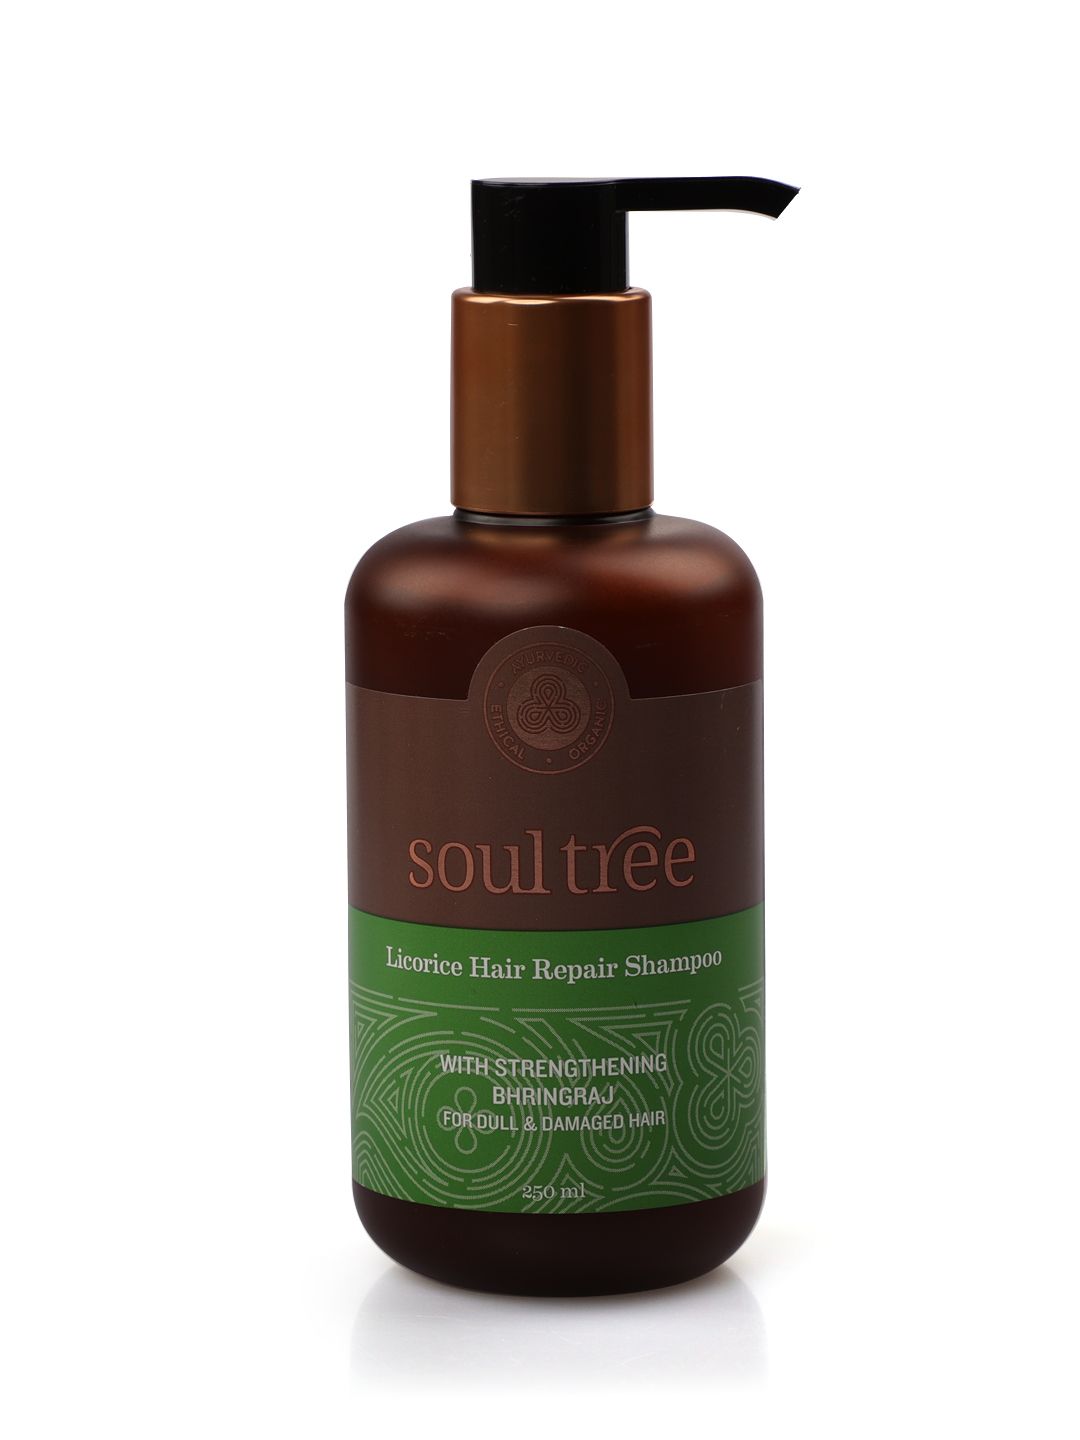 Soultree Licorice Hair Repair Shampoo with Strengthening Bhringraj - 250ml Price in India